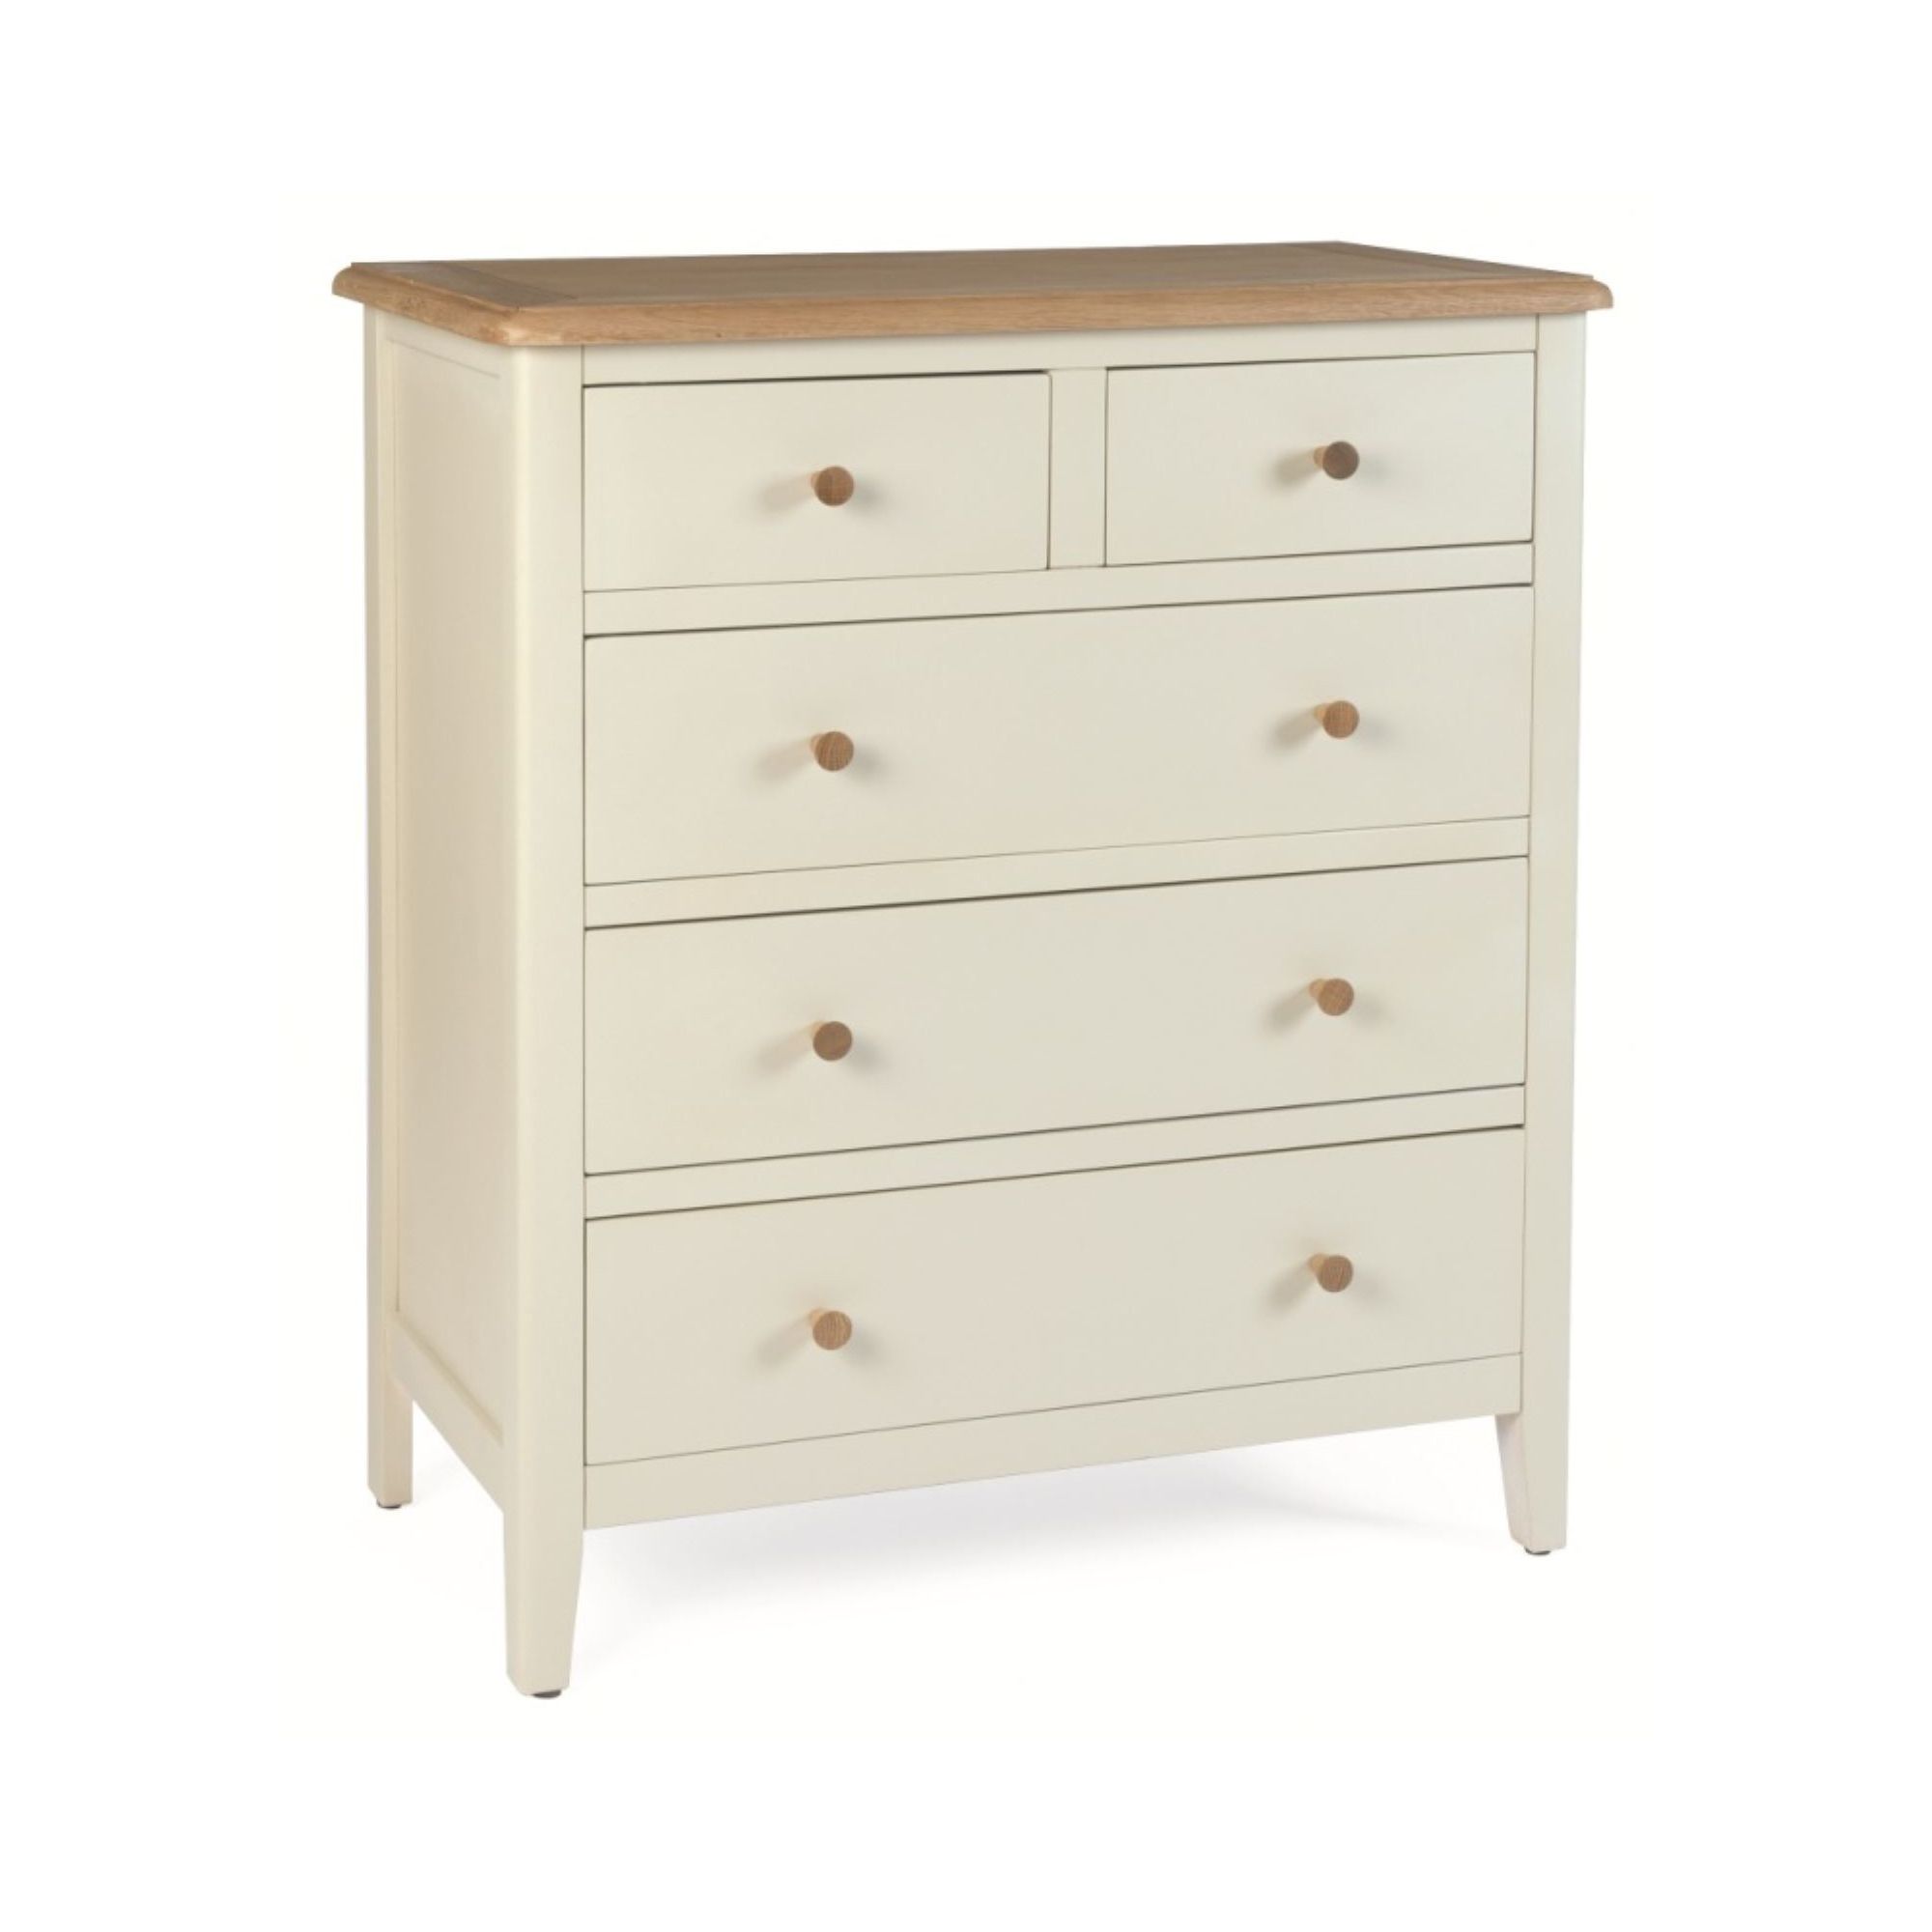 Kelburn Furniture Cottage Painted 2 over 3 Drawer Chest at Tesco Direct